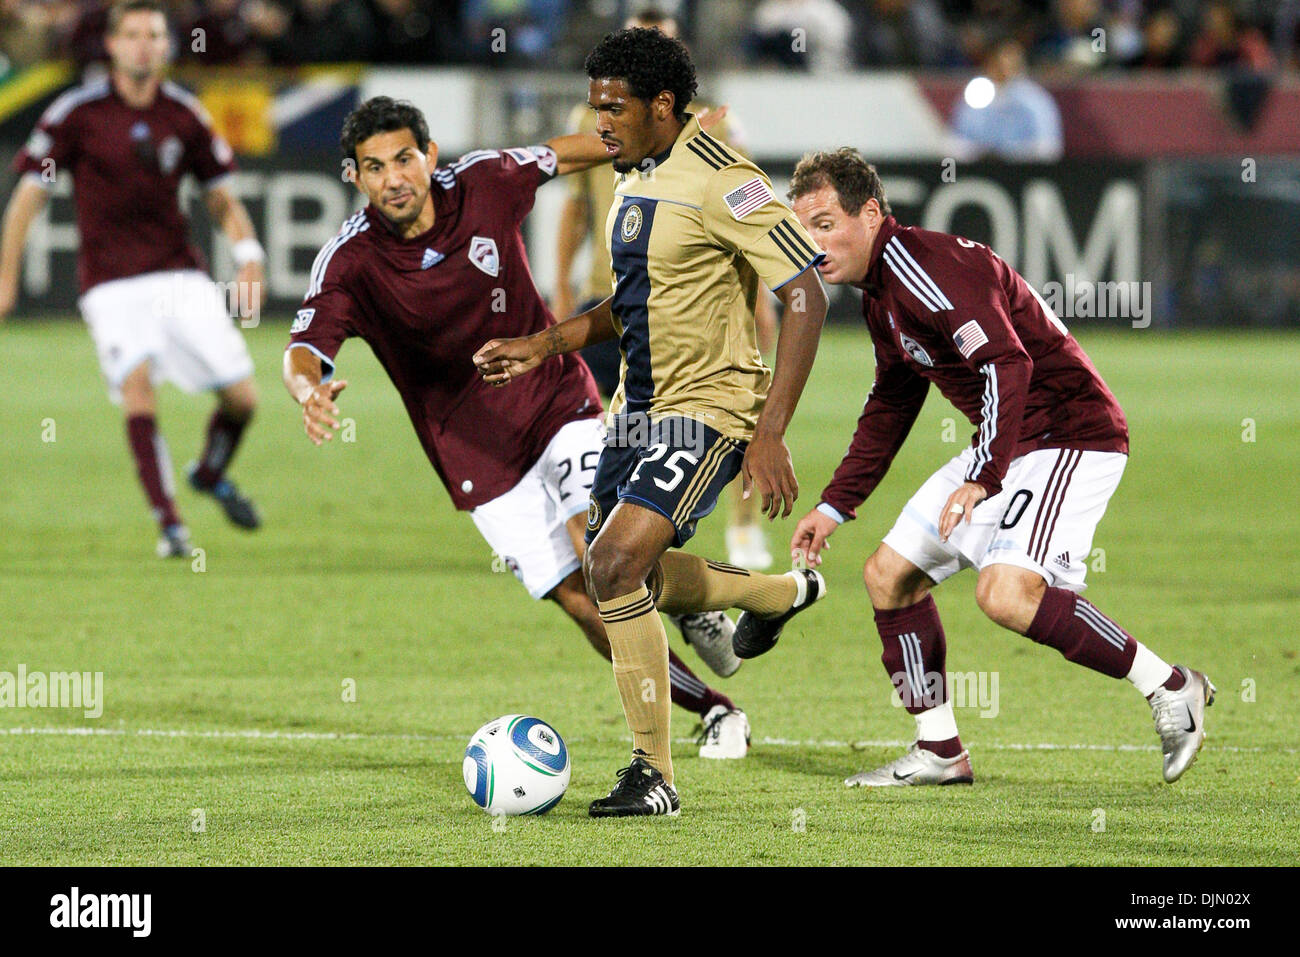 Sept. 29, 2010 - Commerce City, Colorado, United States of America - Rapids midfielder Pablo Mastroeni (25) tries to take the ball from Union midfielder Sheanon Williams (25) during the first half at Dick's Sporting Goods Park in Commerce City, Colorado.  Colorado was leading 2-0 at halftime. (Credit Image: © Evan Meyer/Southcreek Global/ZUMApress.com) Stock Photo